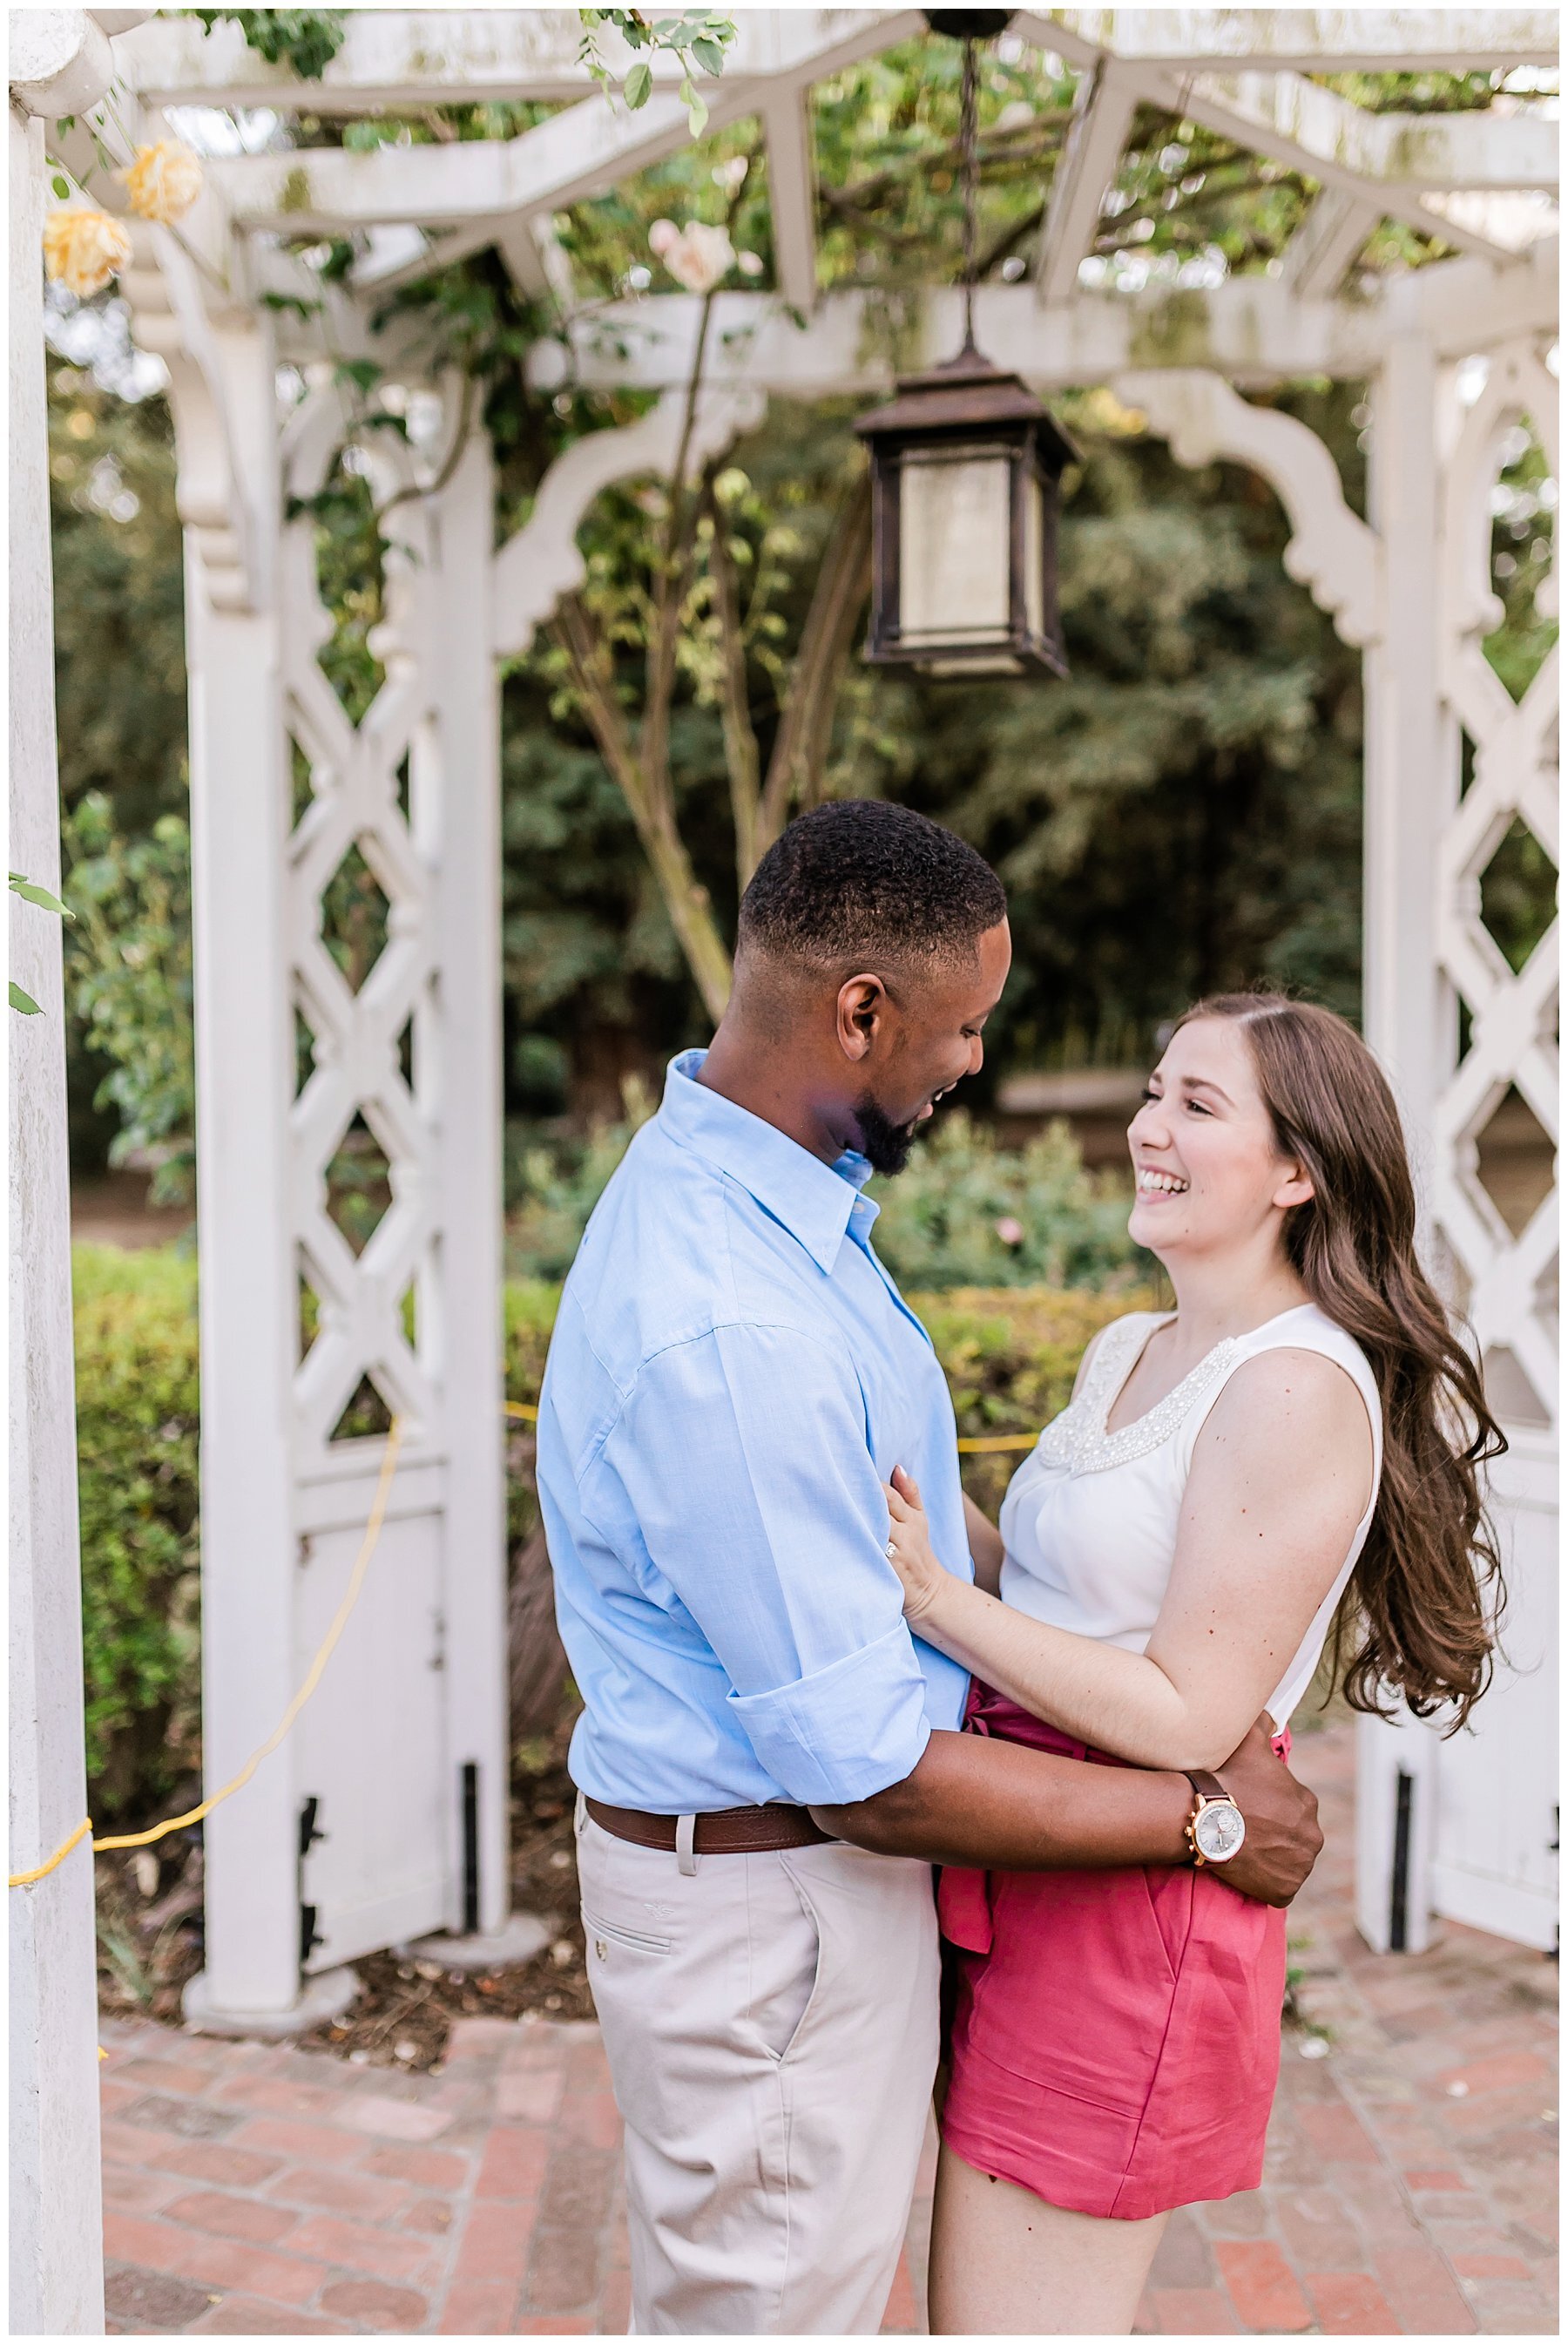  engaged couple in front of an archway 